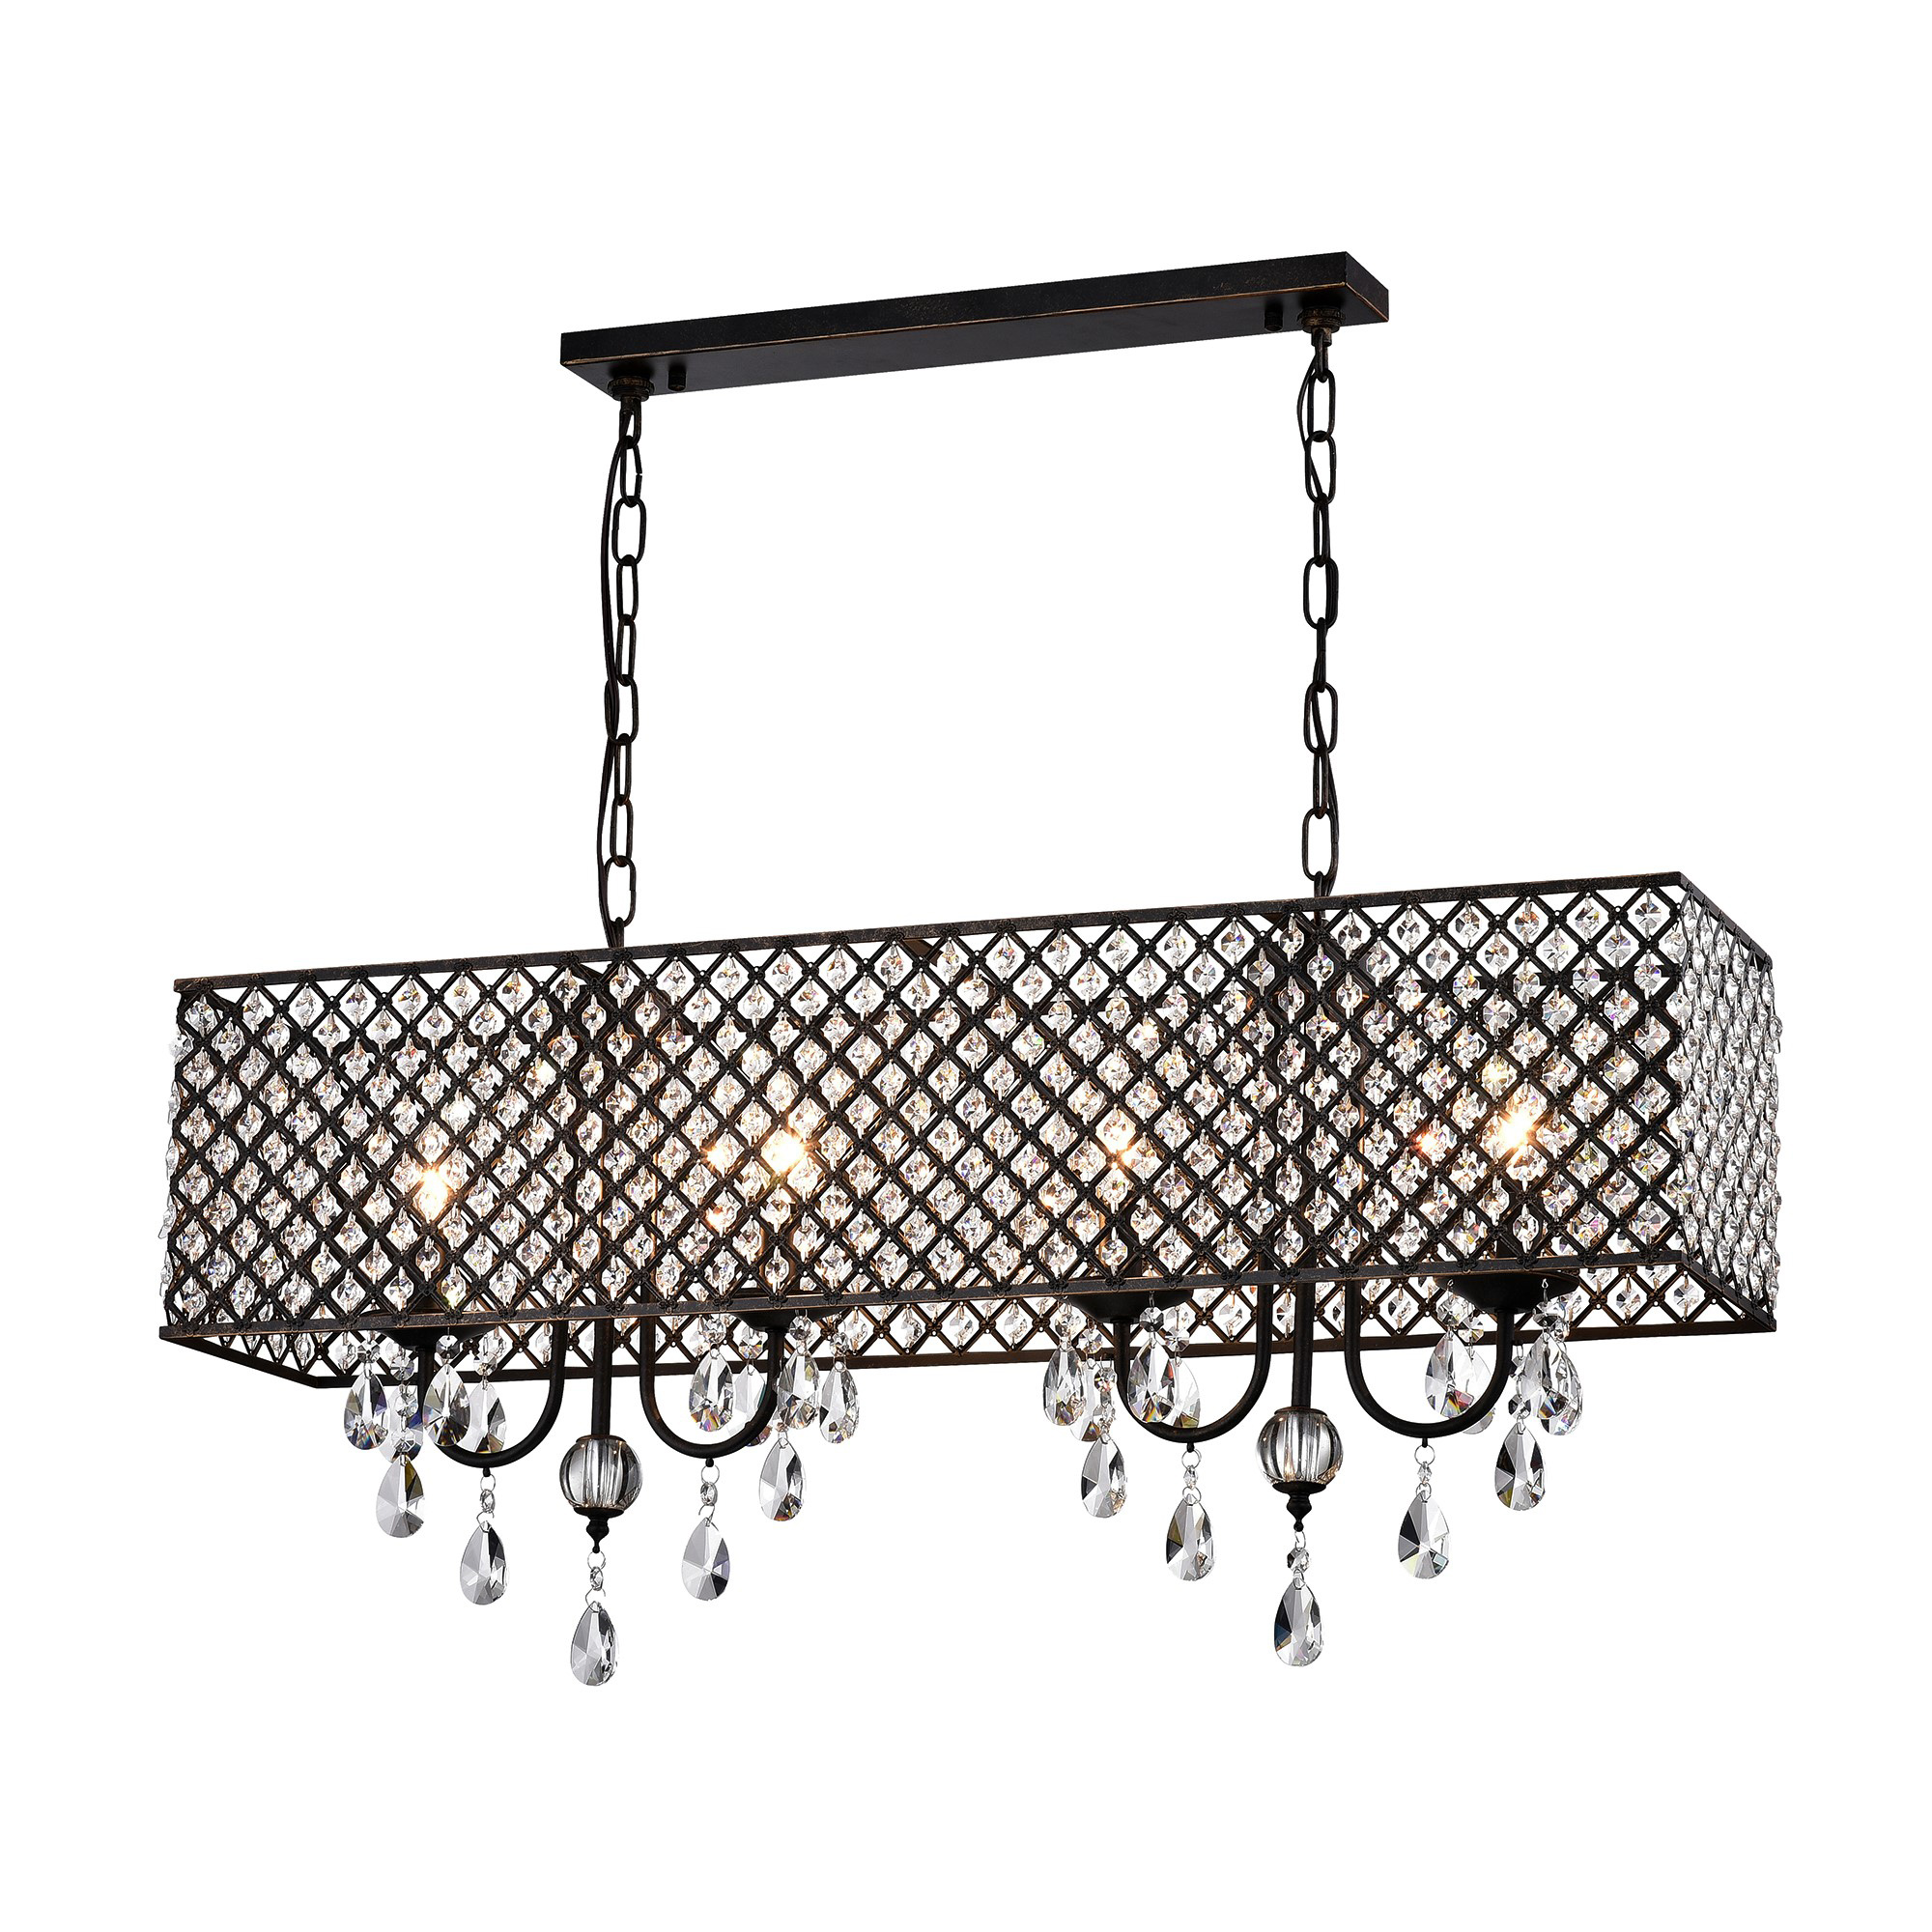 Warehouse of Tiffany Aruna Antique Copper Metal 4-Light Chandelier with Crystals